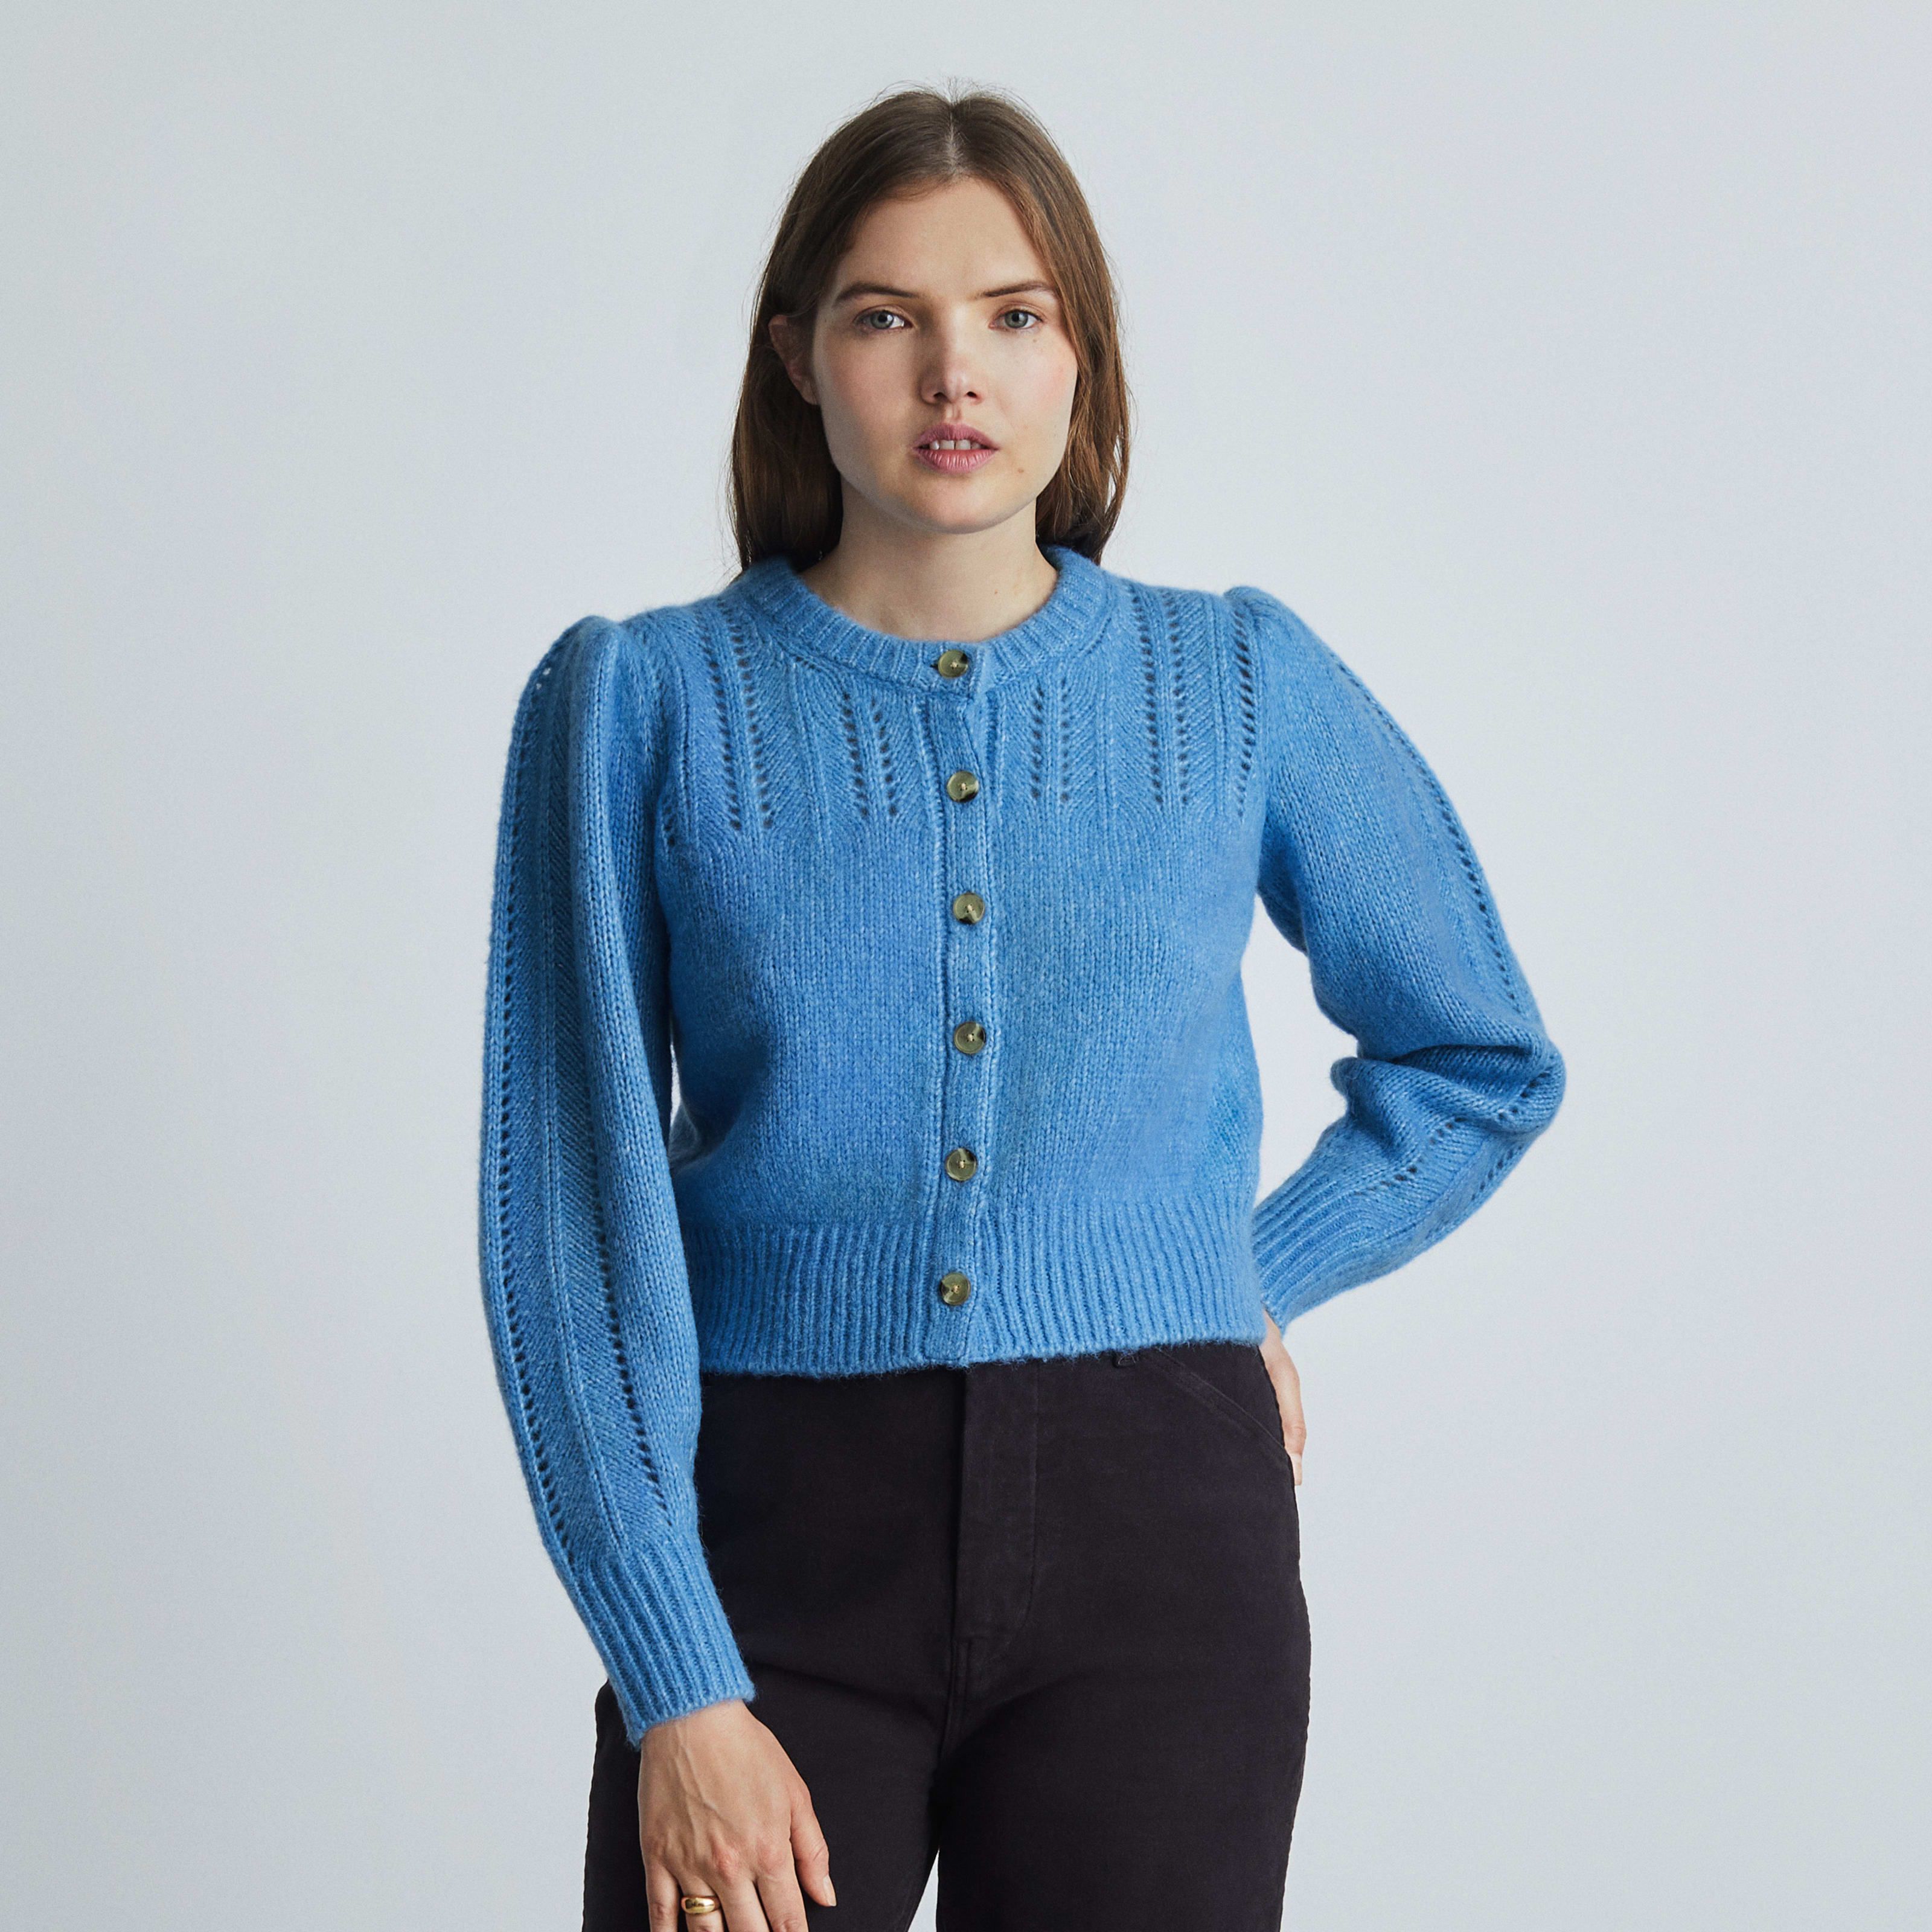 Women's Cloud Cardigan by Everlane in Lake, Size L | Everlane